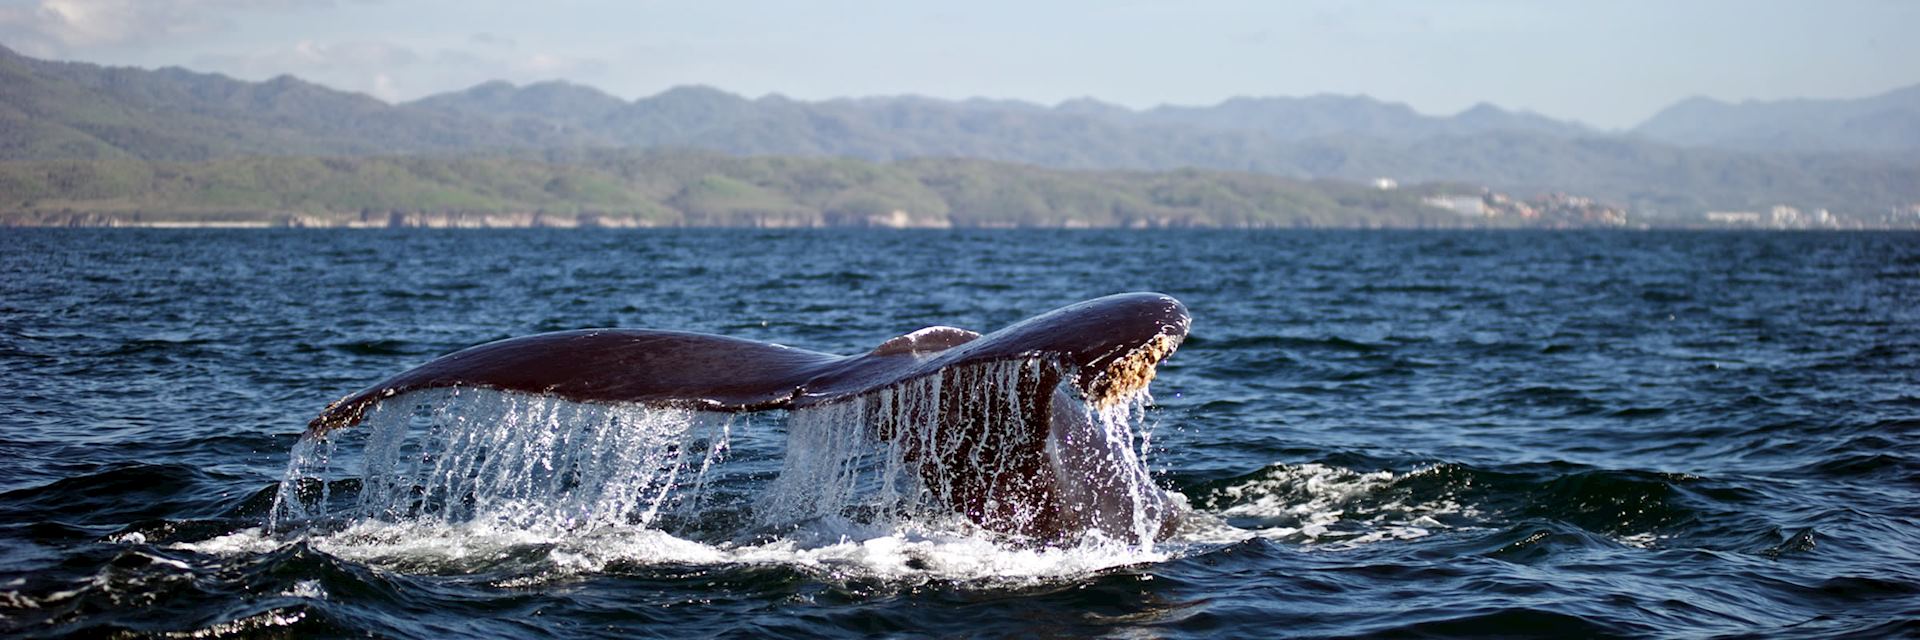 A whale surfaces off the coast of Puerto Vallarta